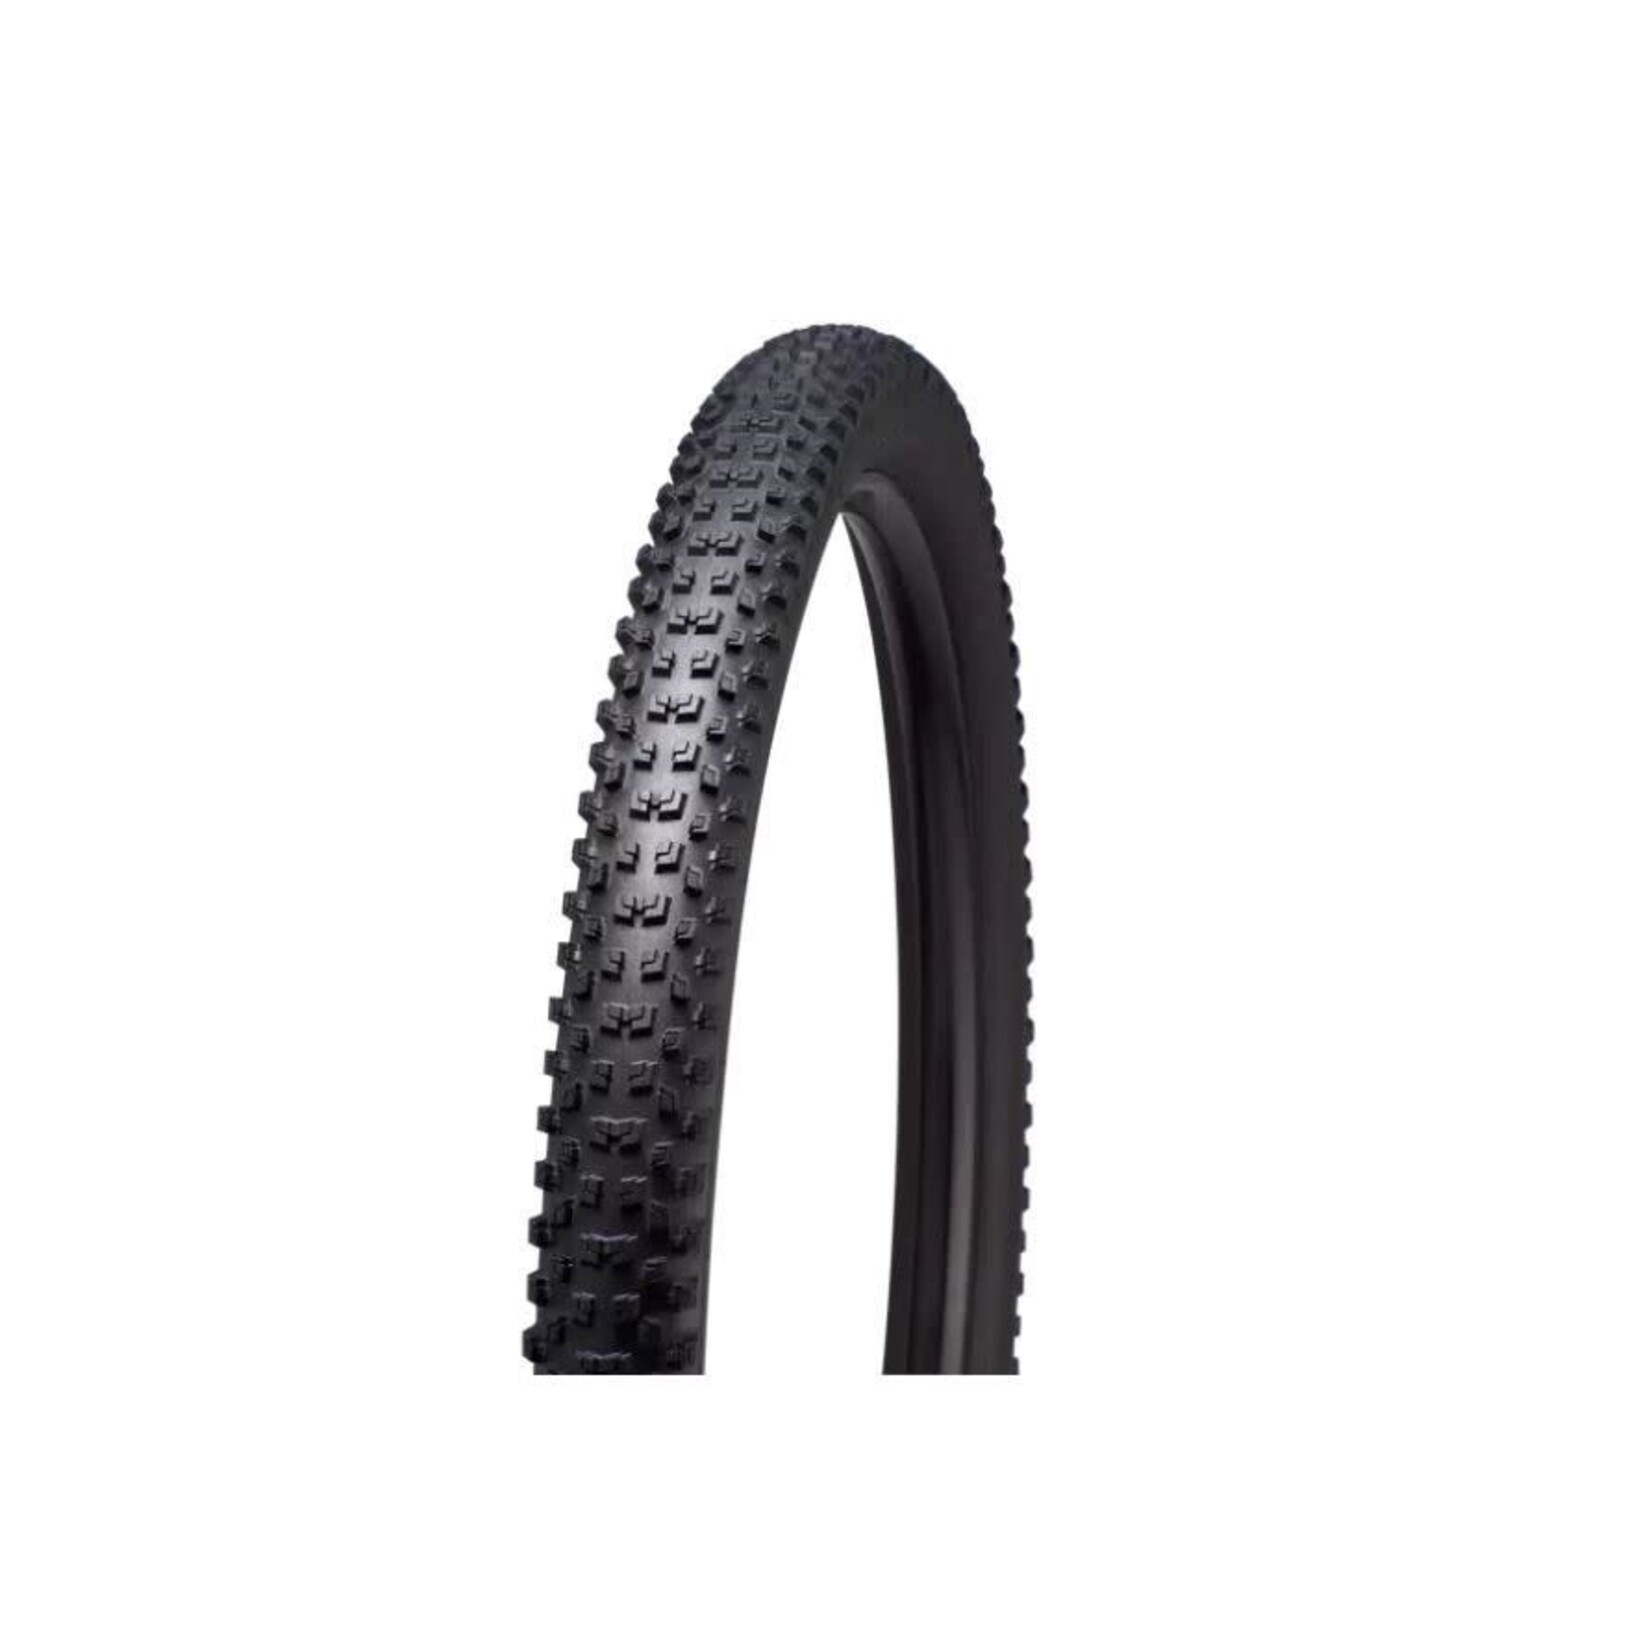 Specialized GROUND CONTROL GRID 2BR TIRE 27.5 x 2.6